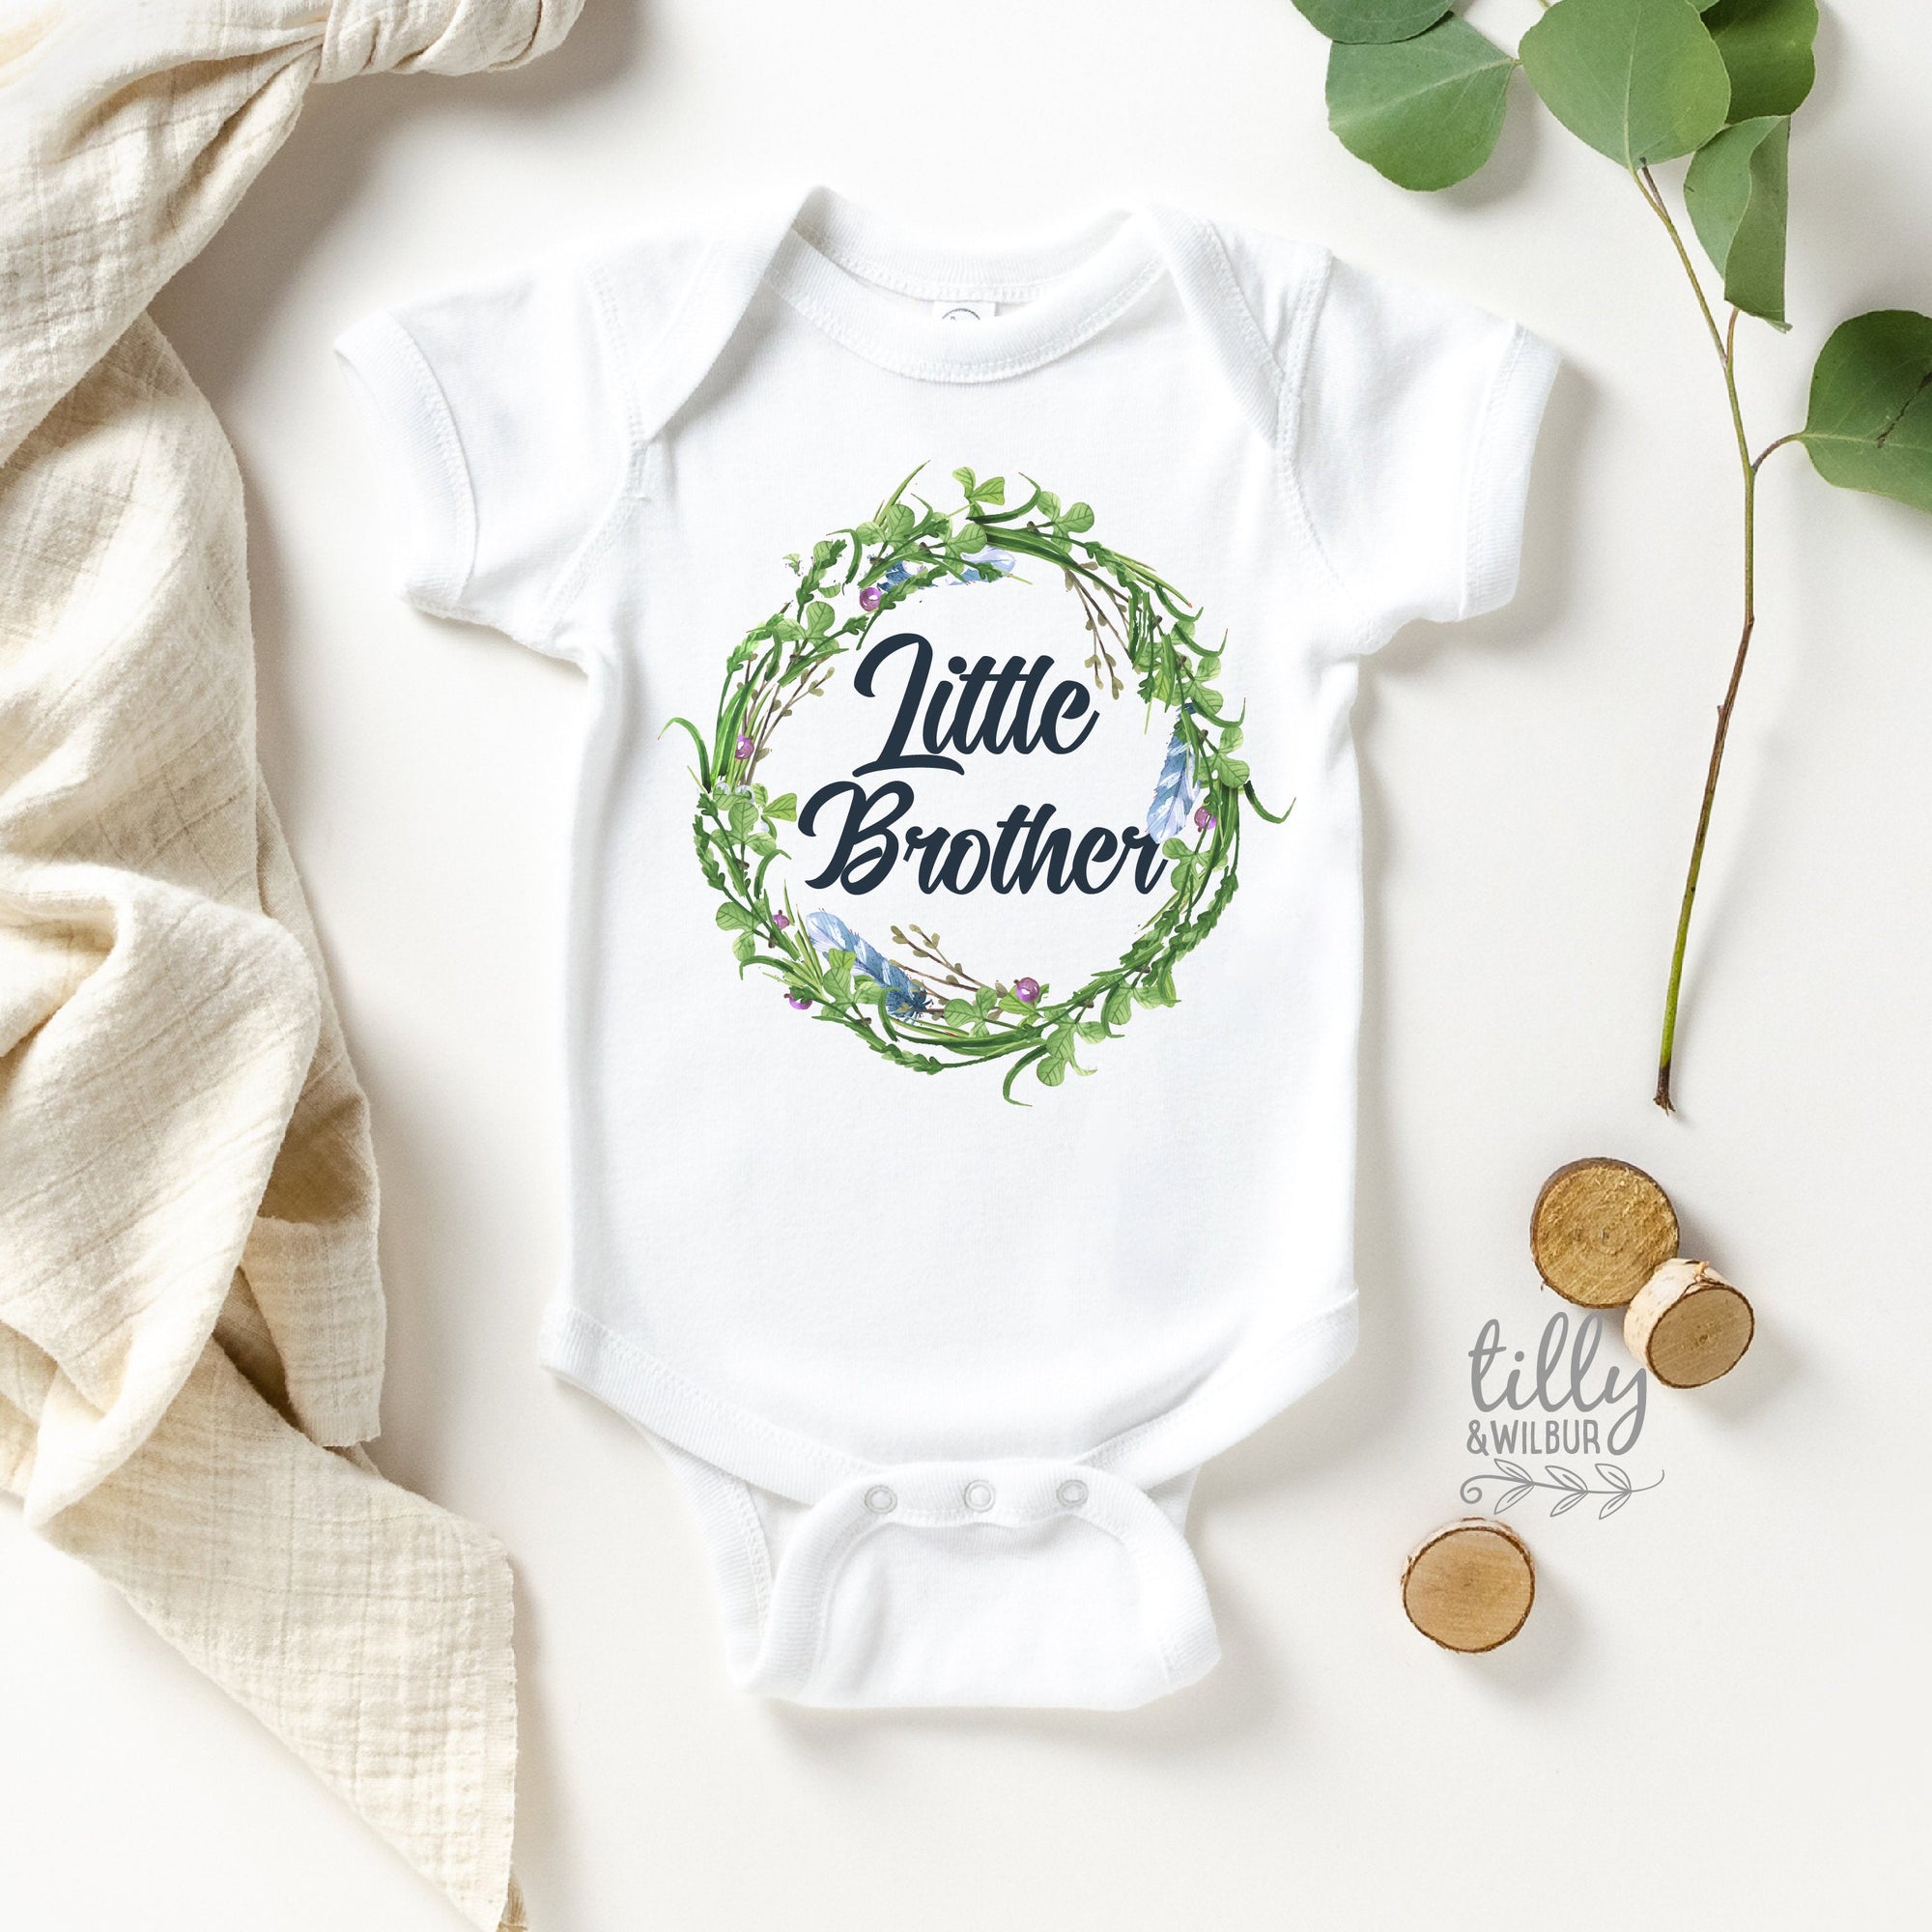 Little Brother Bodysuit To Add To Matching Big Sister T-Shirt With Floral Design, Sister Brother Outfit, Little Bro, Little Brother Bodysuit